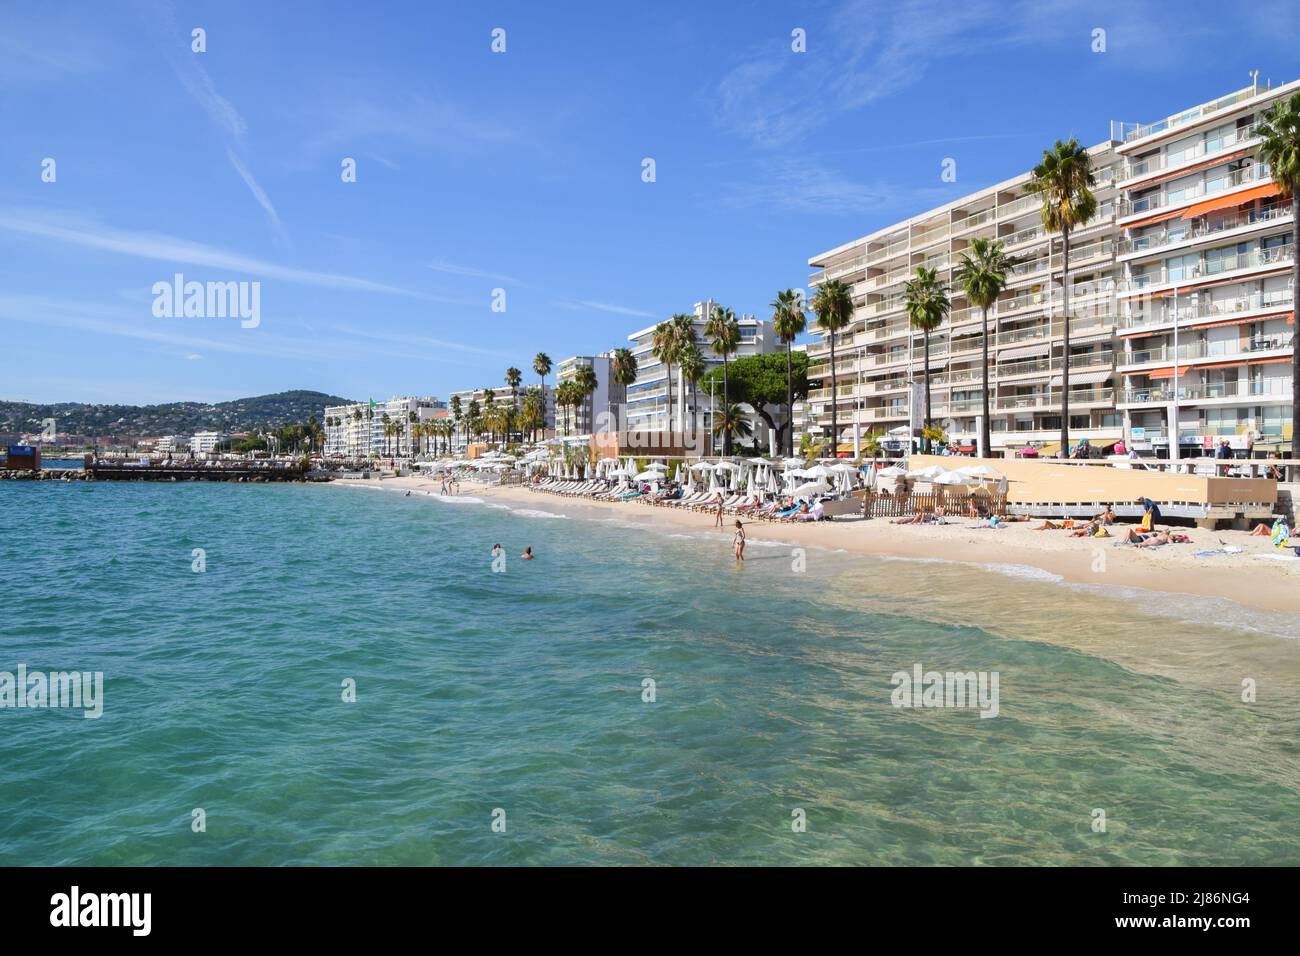 Beach in Juan Les Pins, South of France Stock Photo - Alamy